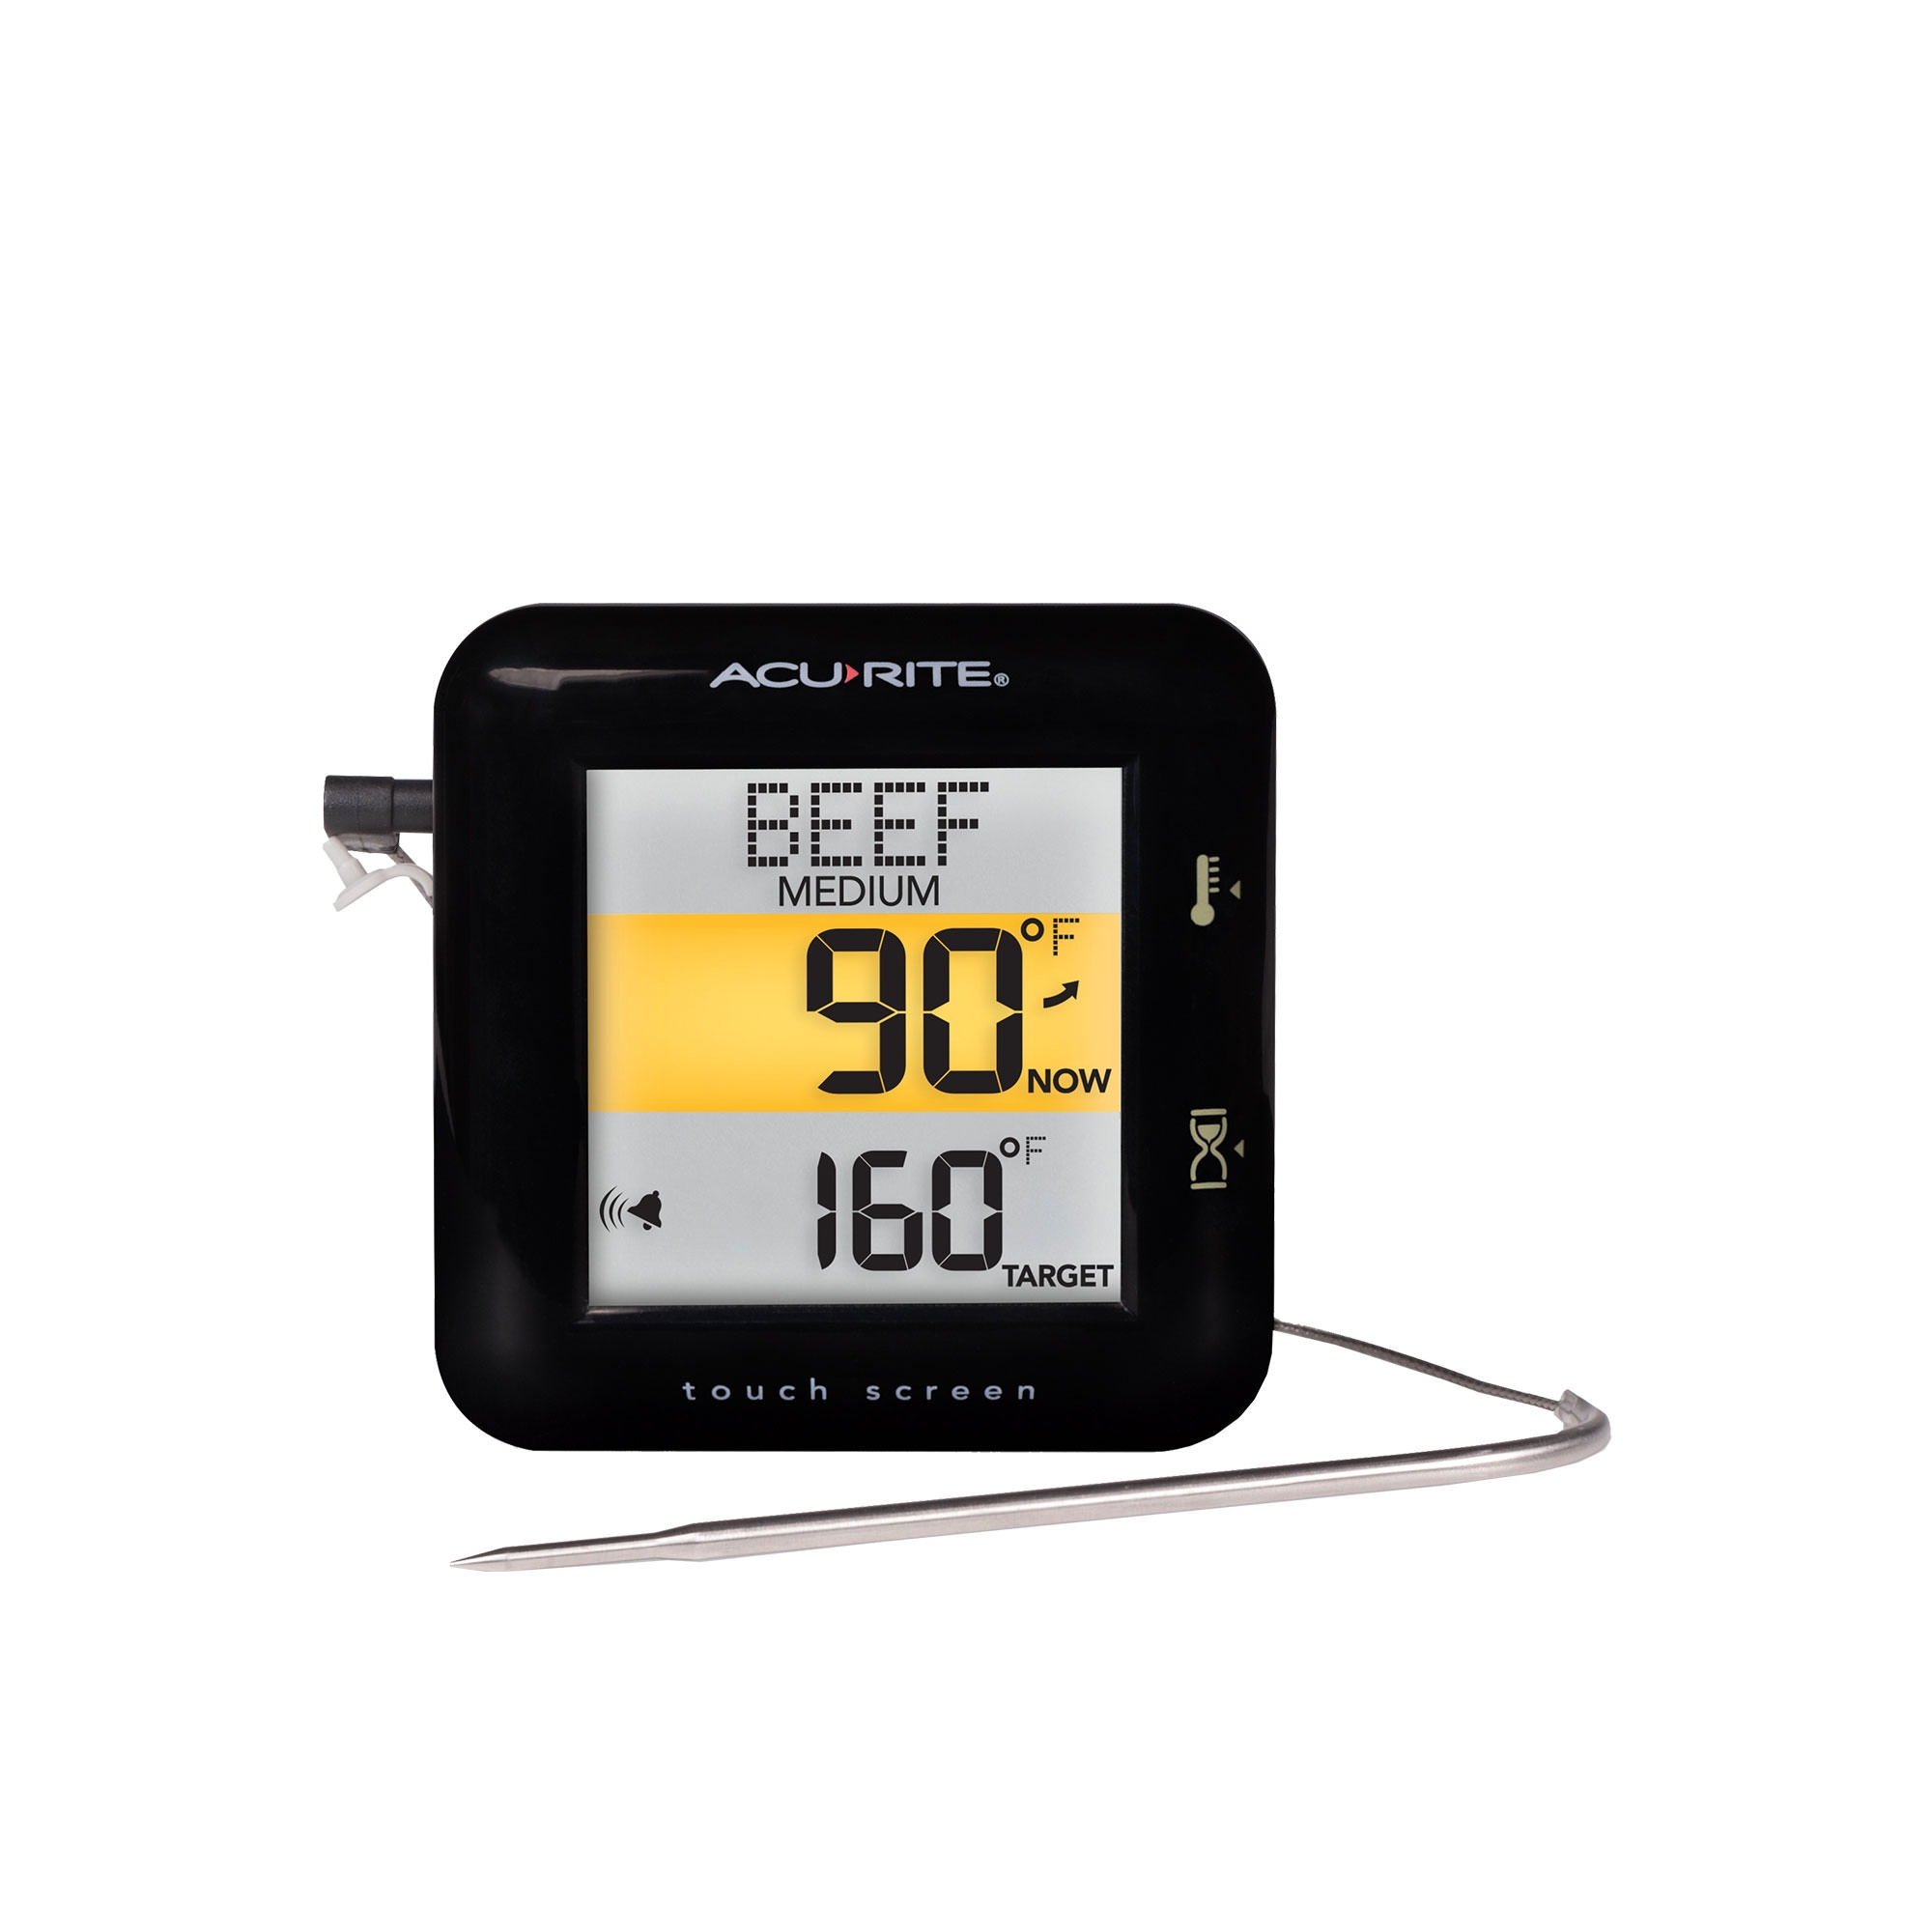 Acurite Touchscreen Thermometer & Timer Image 1